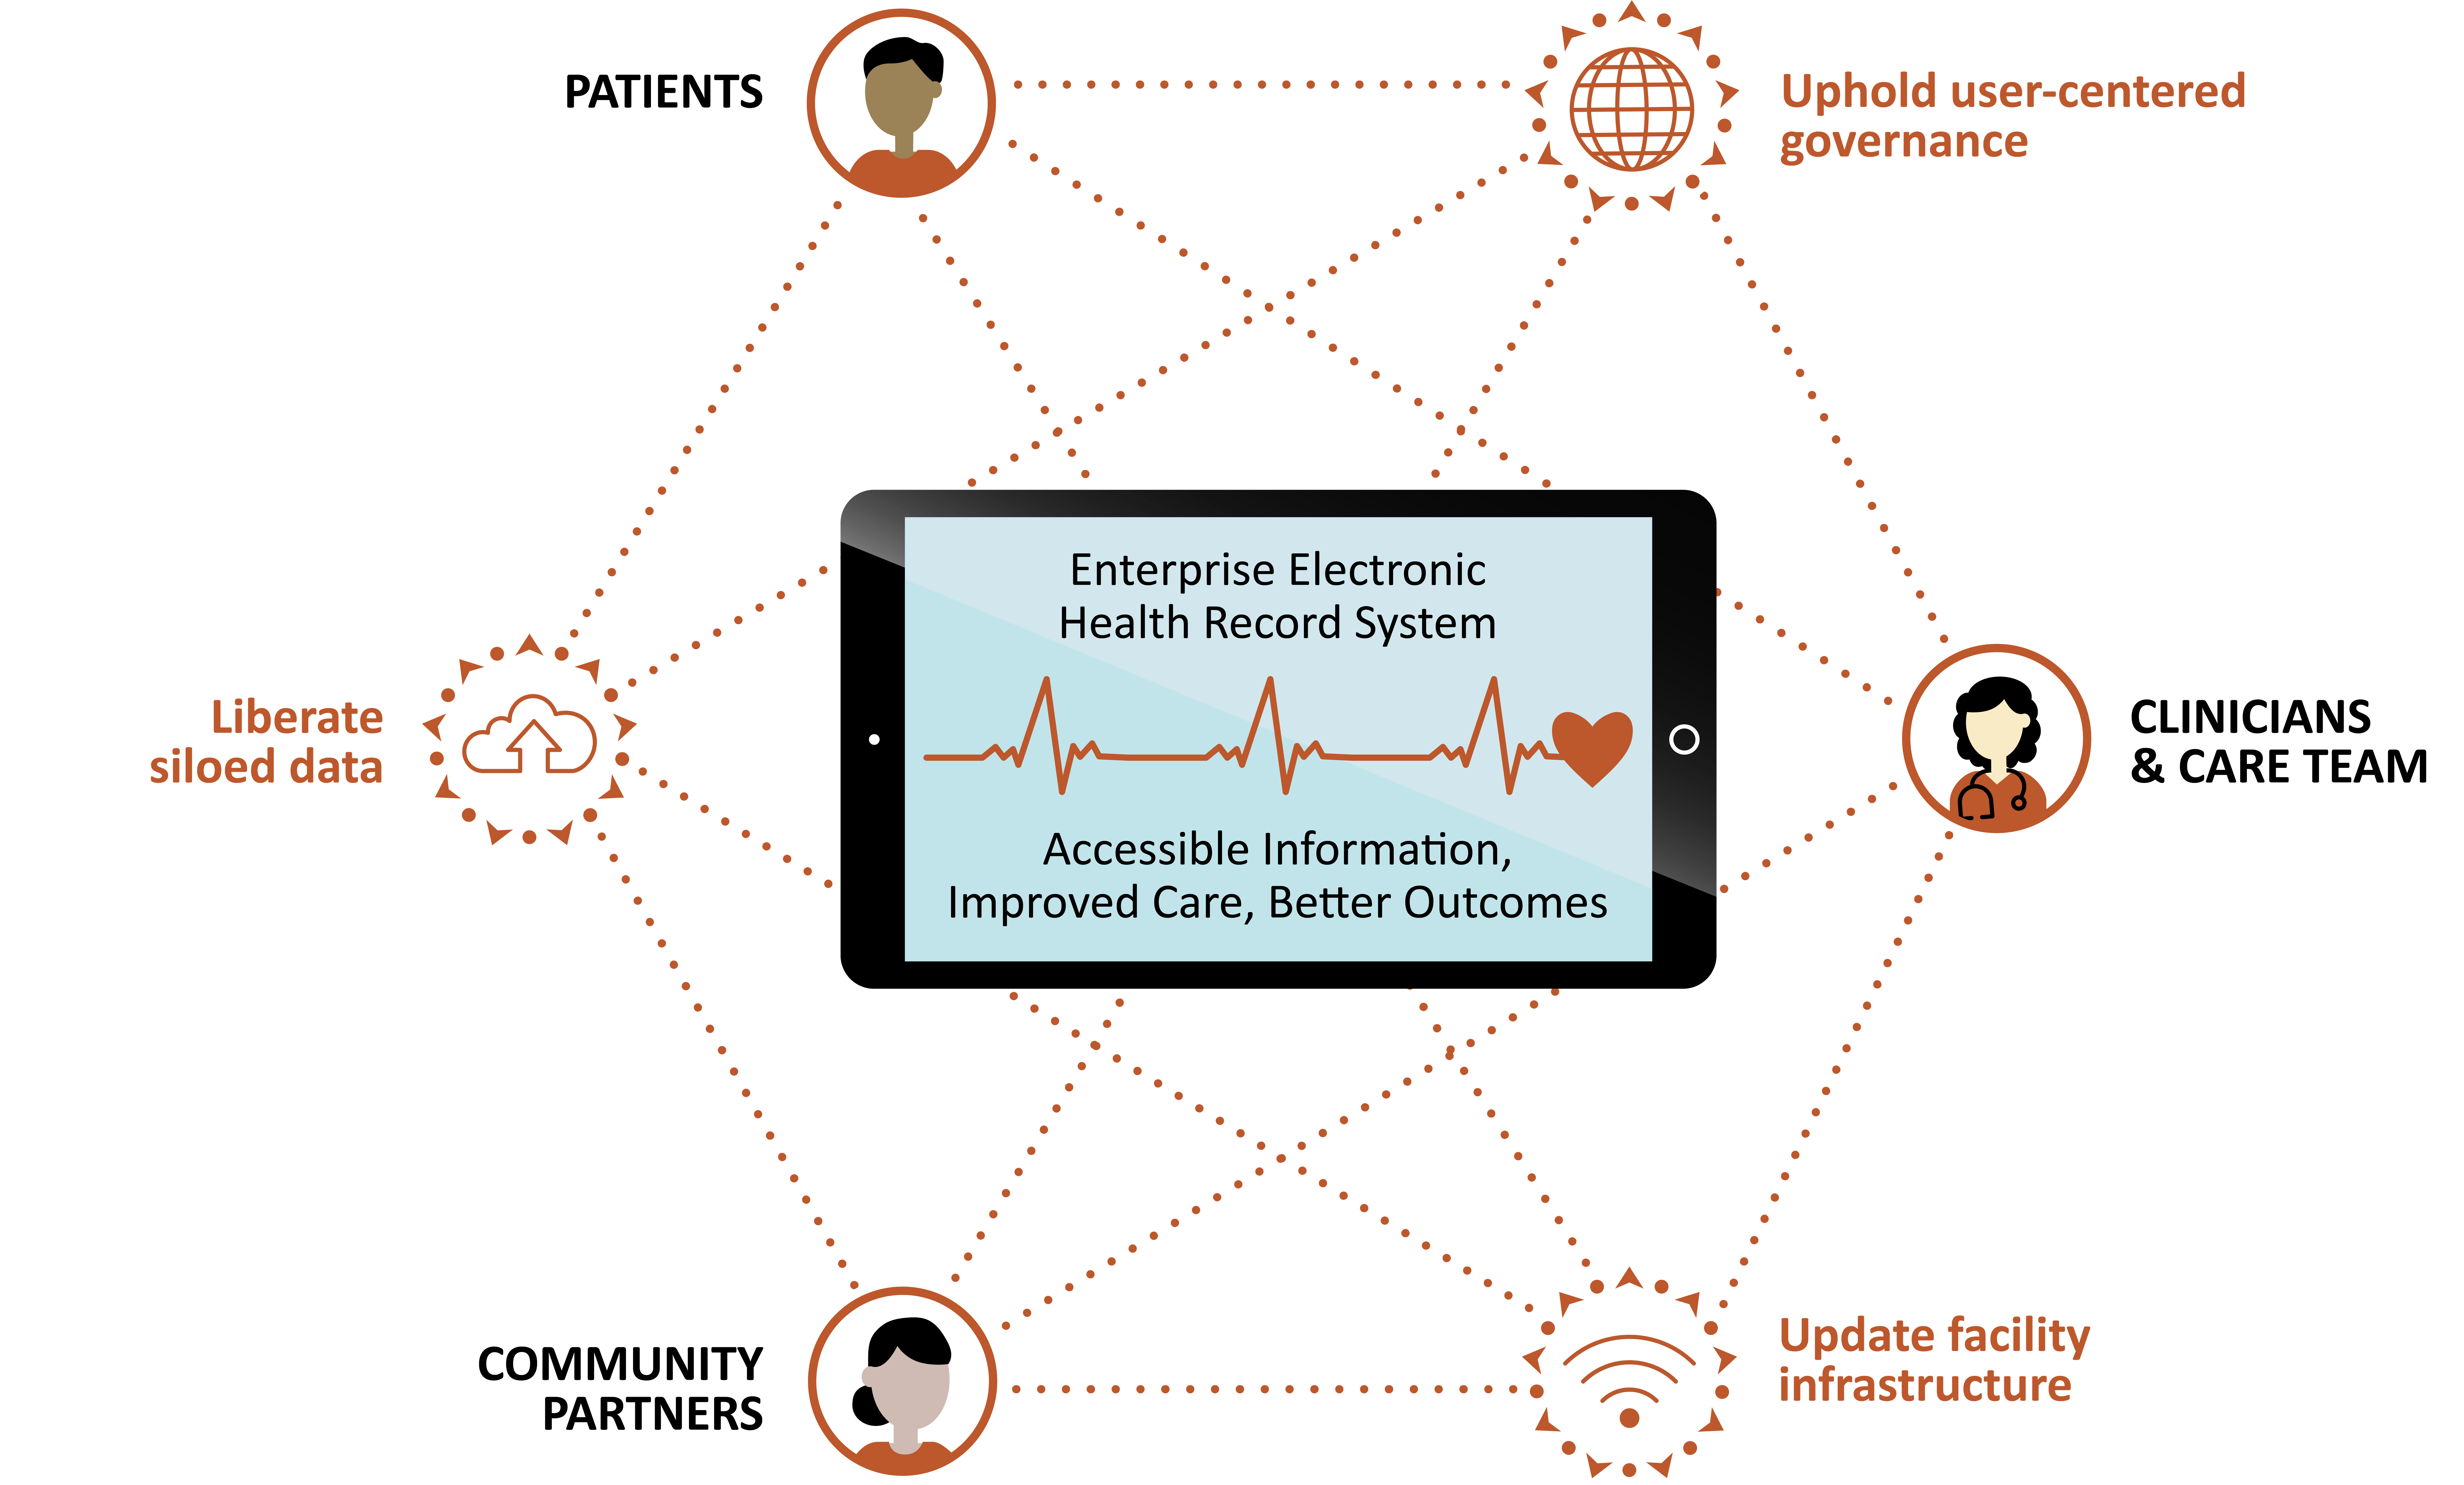 Graphic shows images of patients, care team, and community partners connected with governance, facility infrastructure, and data. A tablet is in the middle and reads “Enterprise Electronic Health Record System, Accessible Information, Improved Care, Better Outcomes.